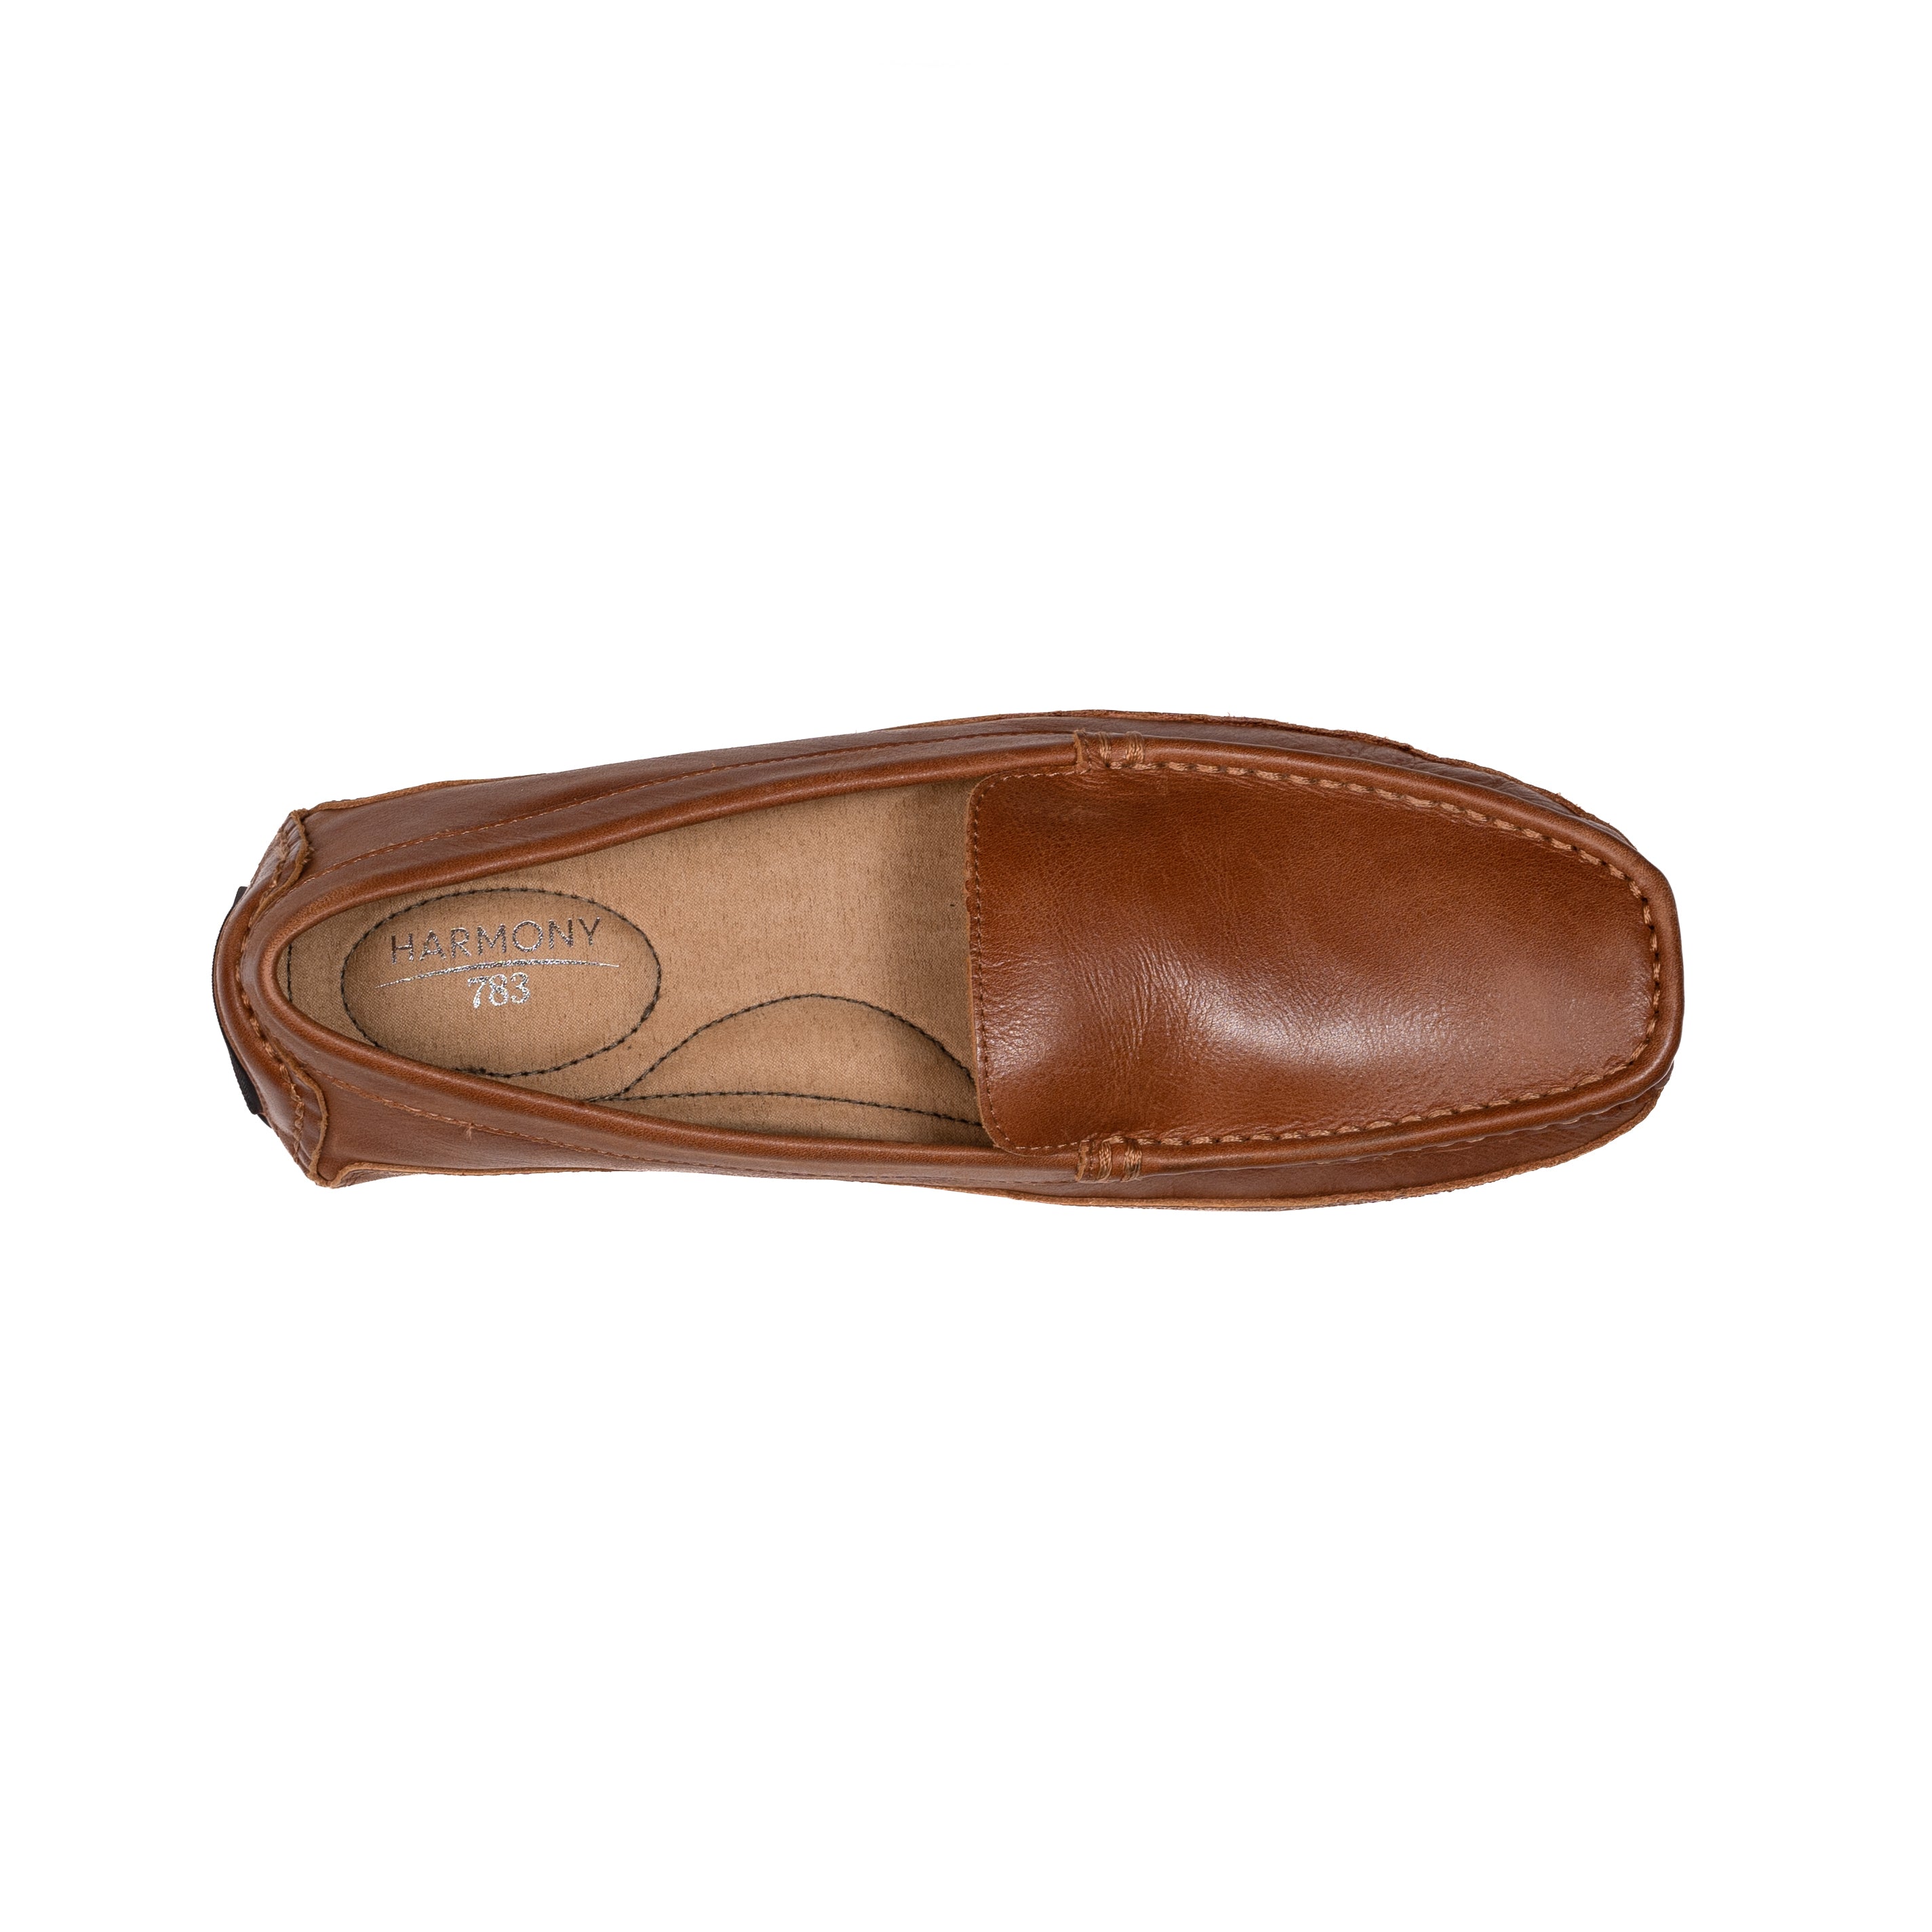 Men's Grounding Driver • Brown Leather